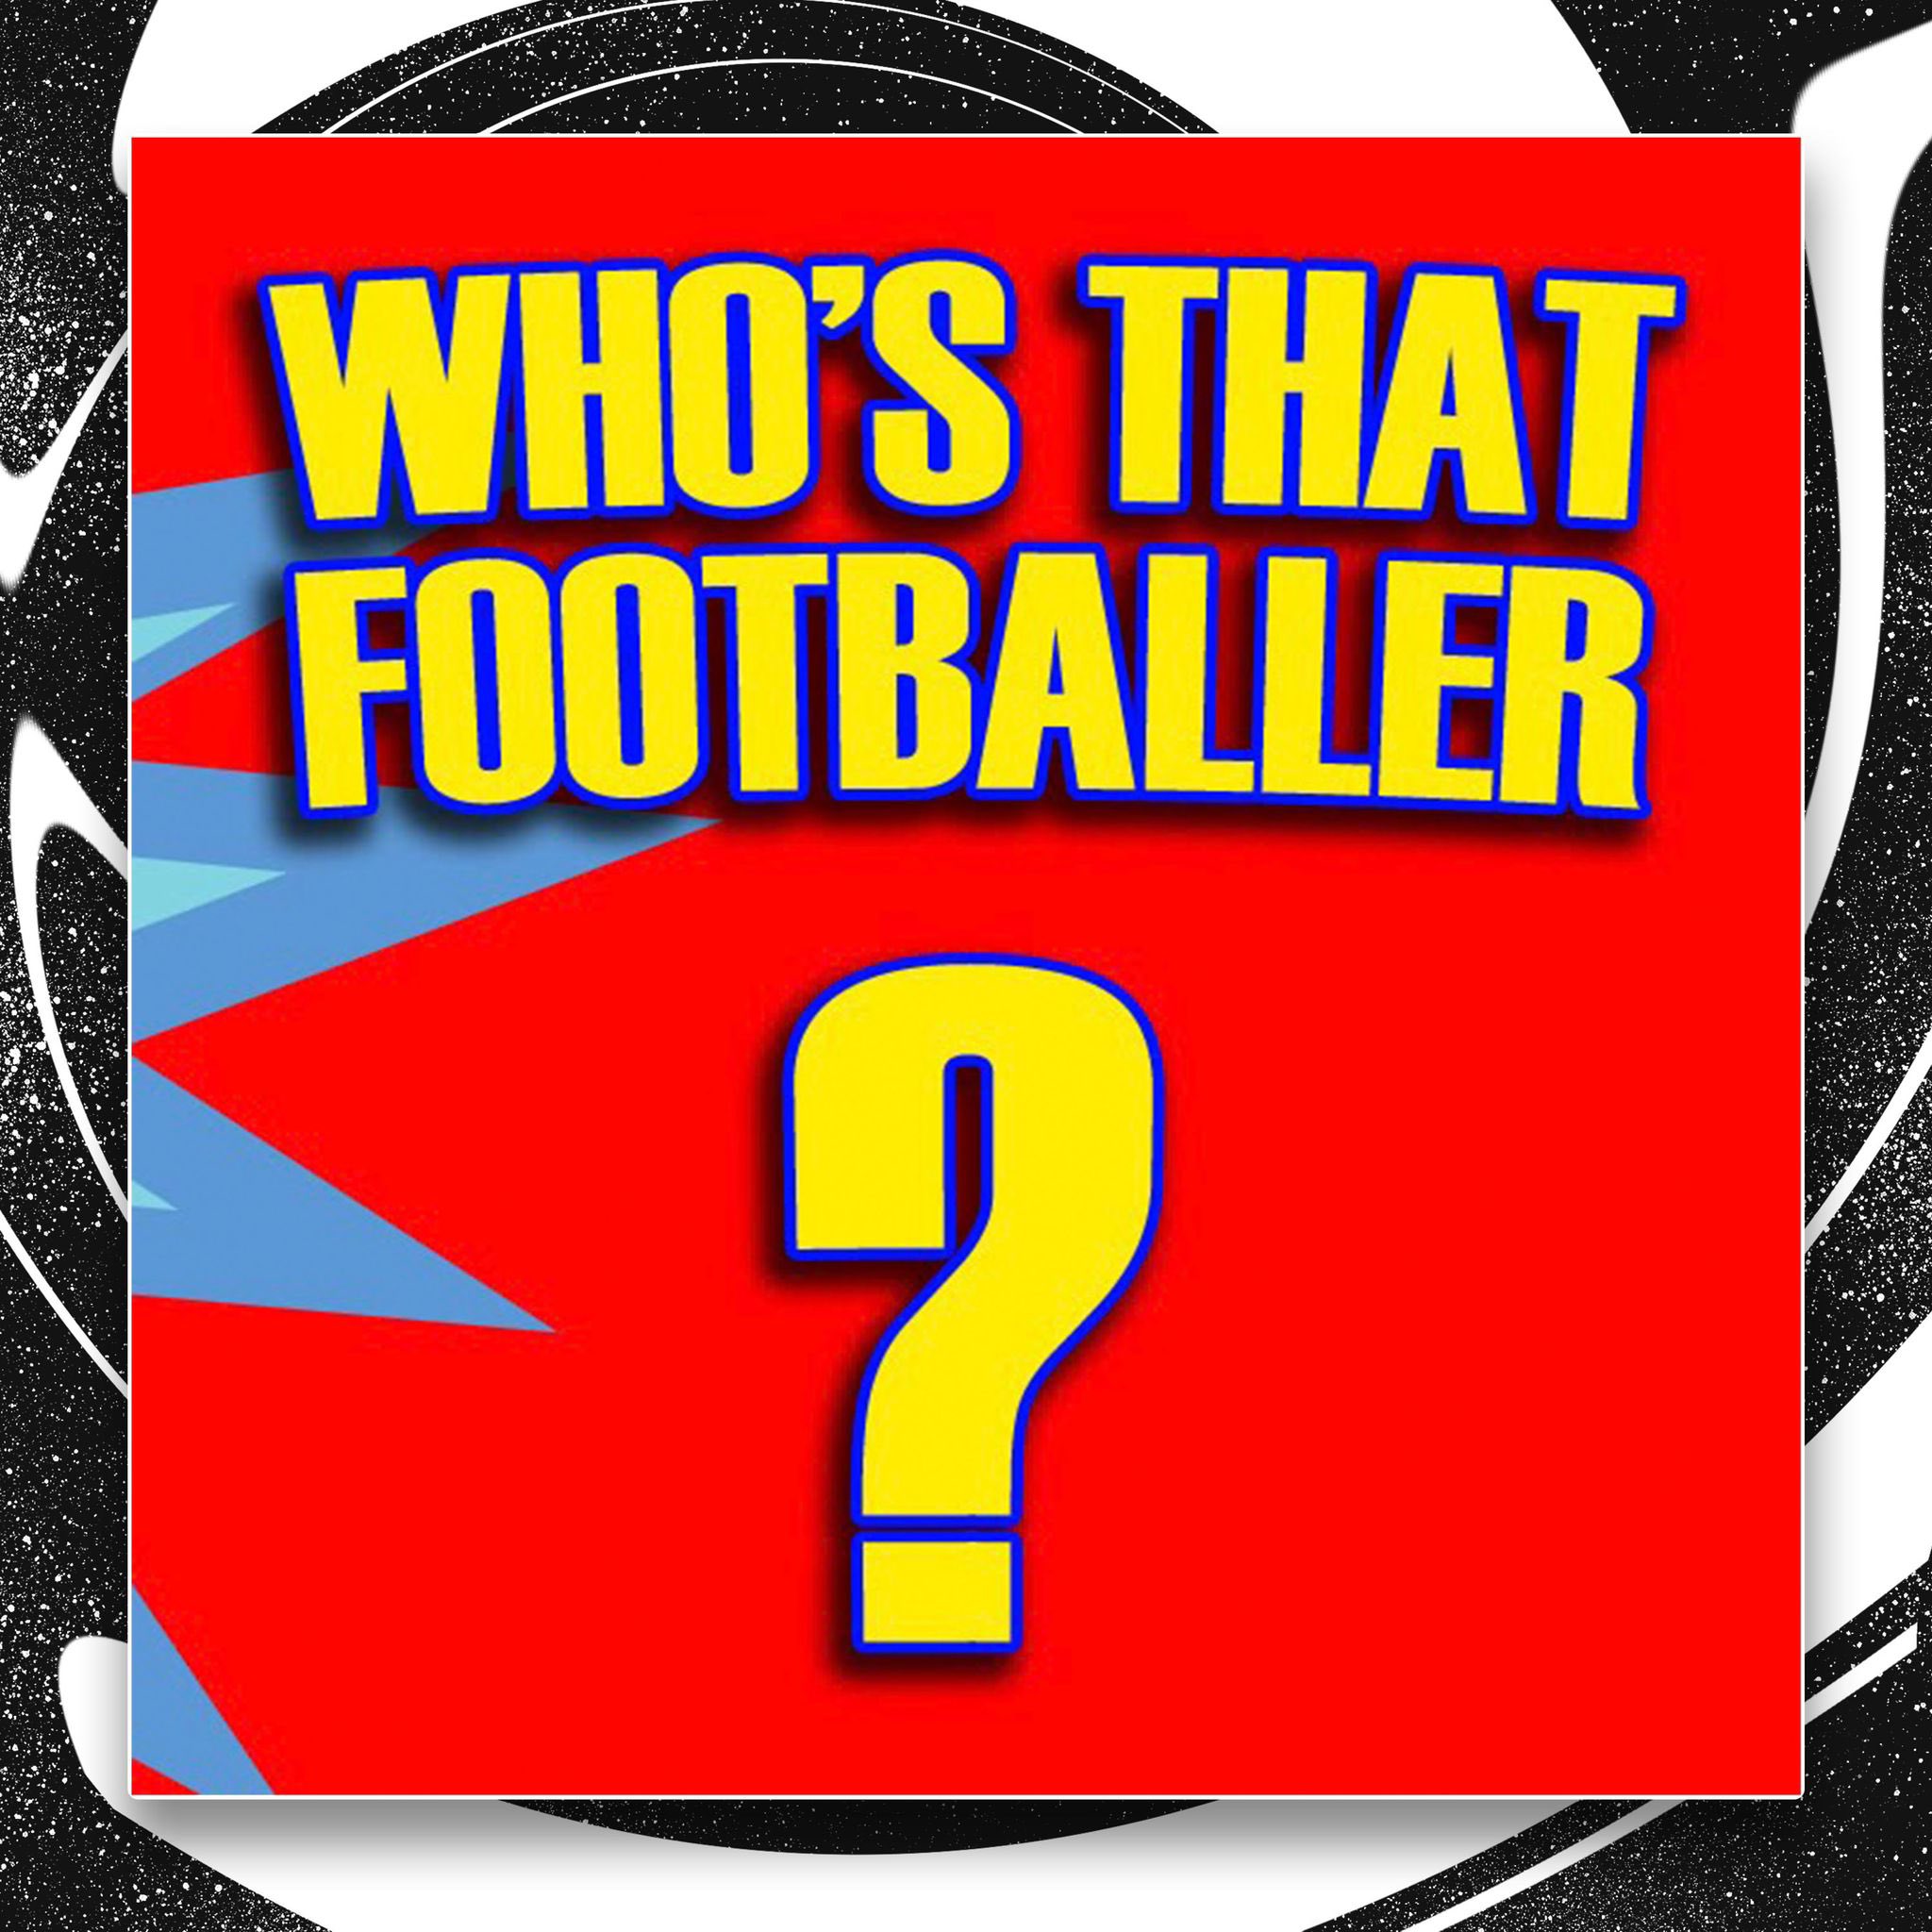 New Game, guess the club! #FIFA #Soccer #football